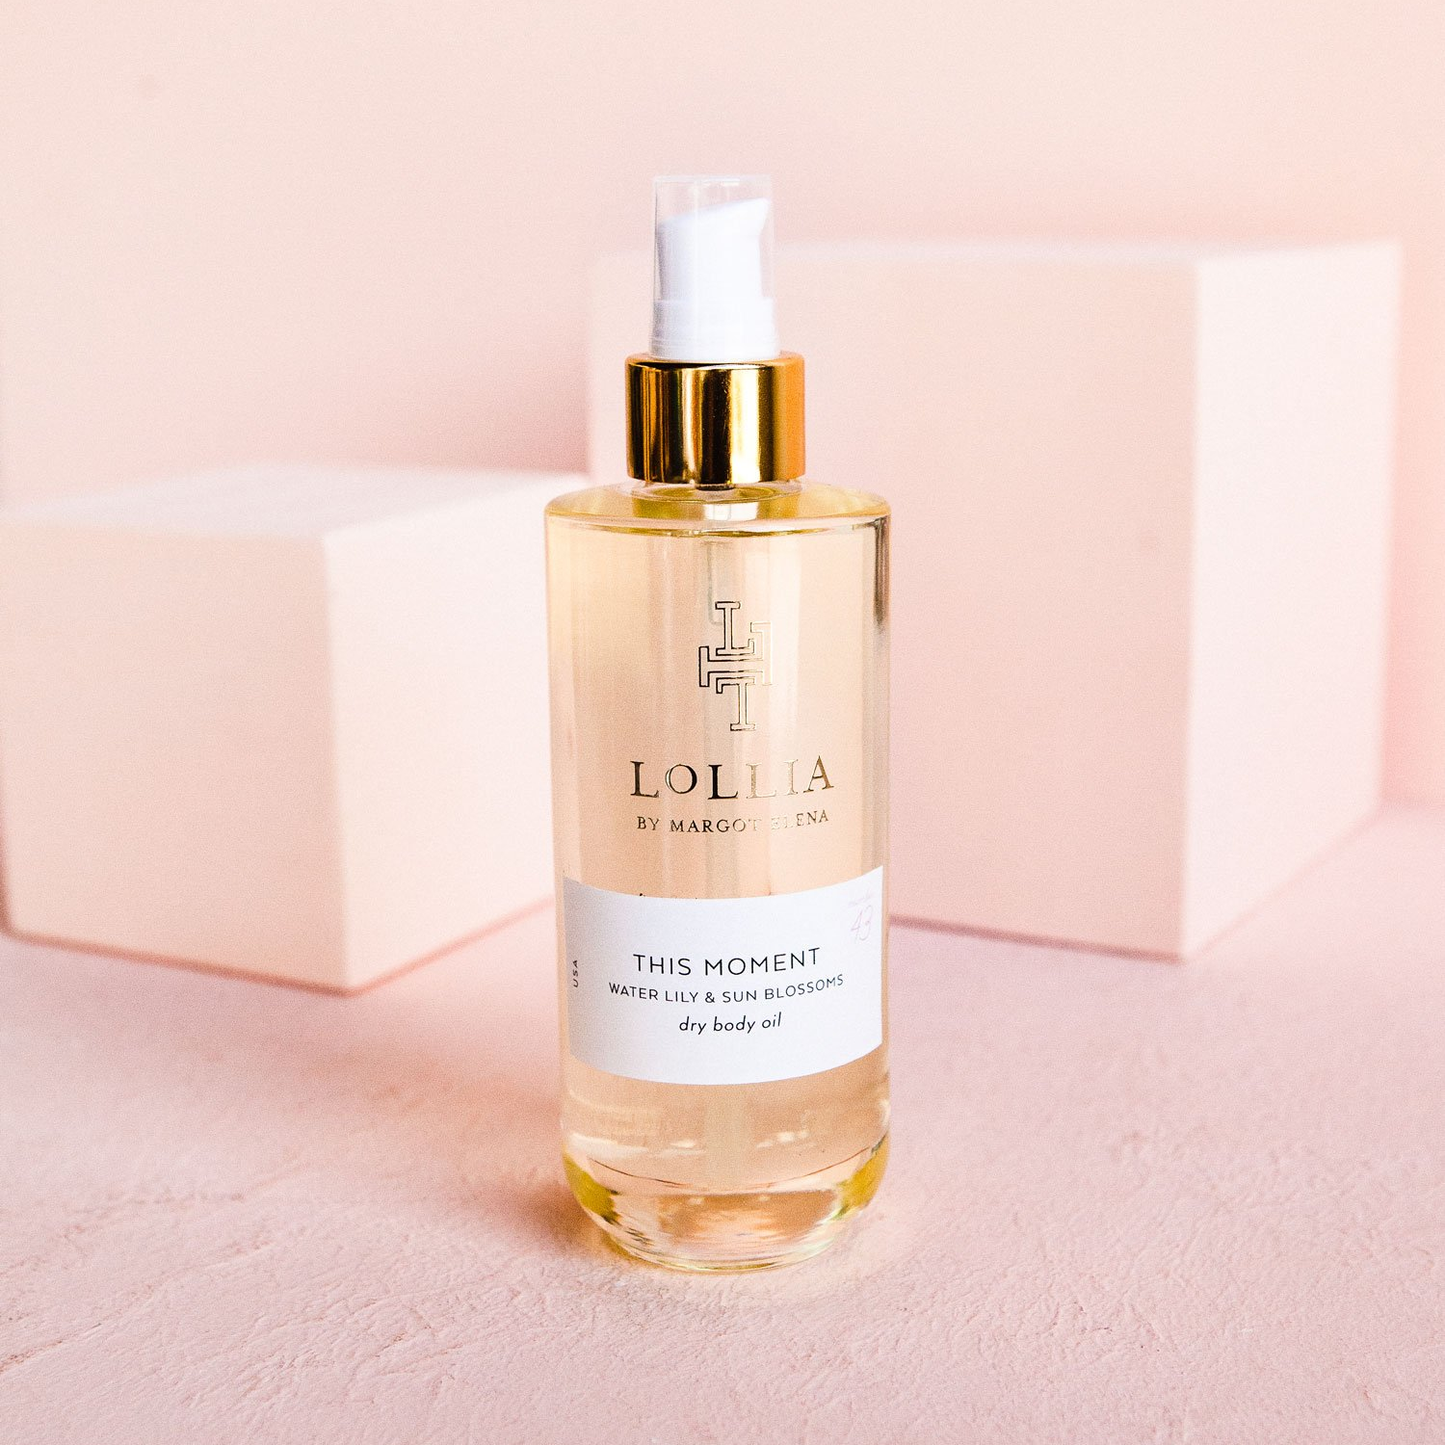 This Moment Dry Body Oil